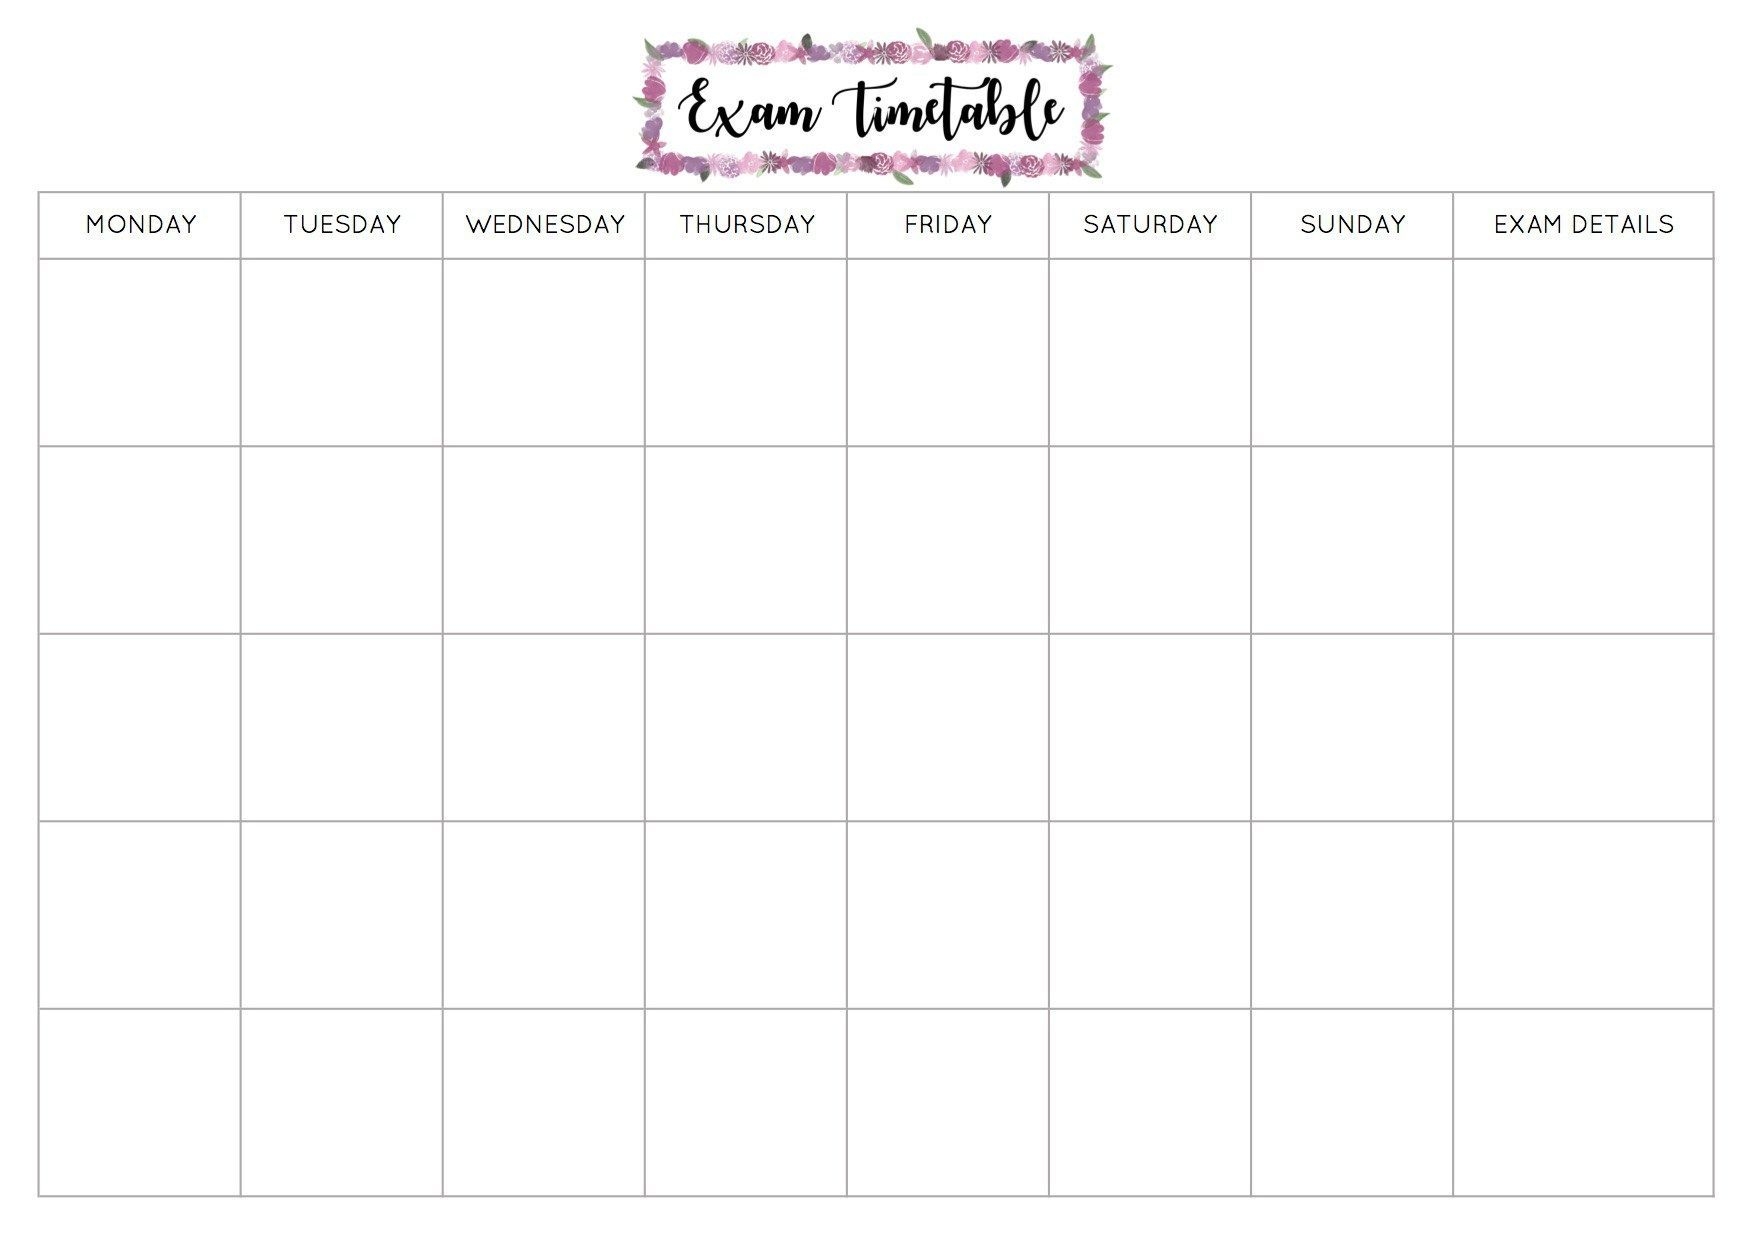 Free Exam Timetable Printable | Study Schedule Template